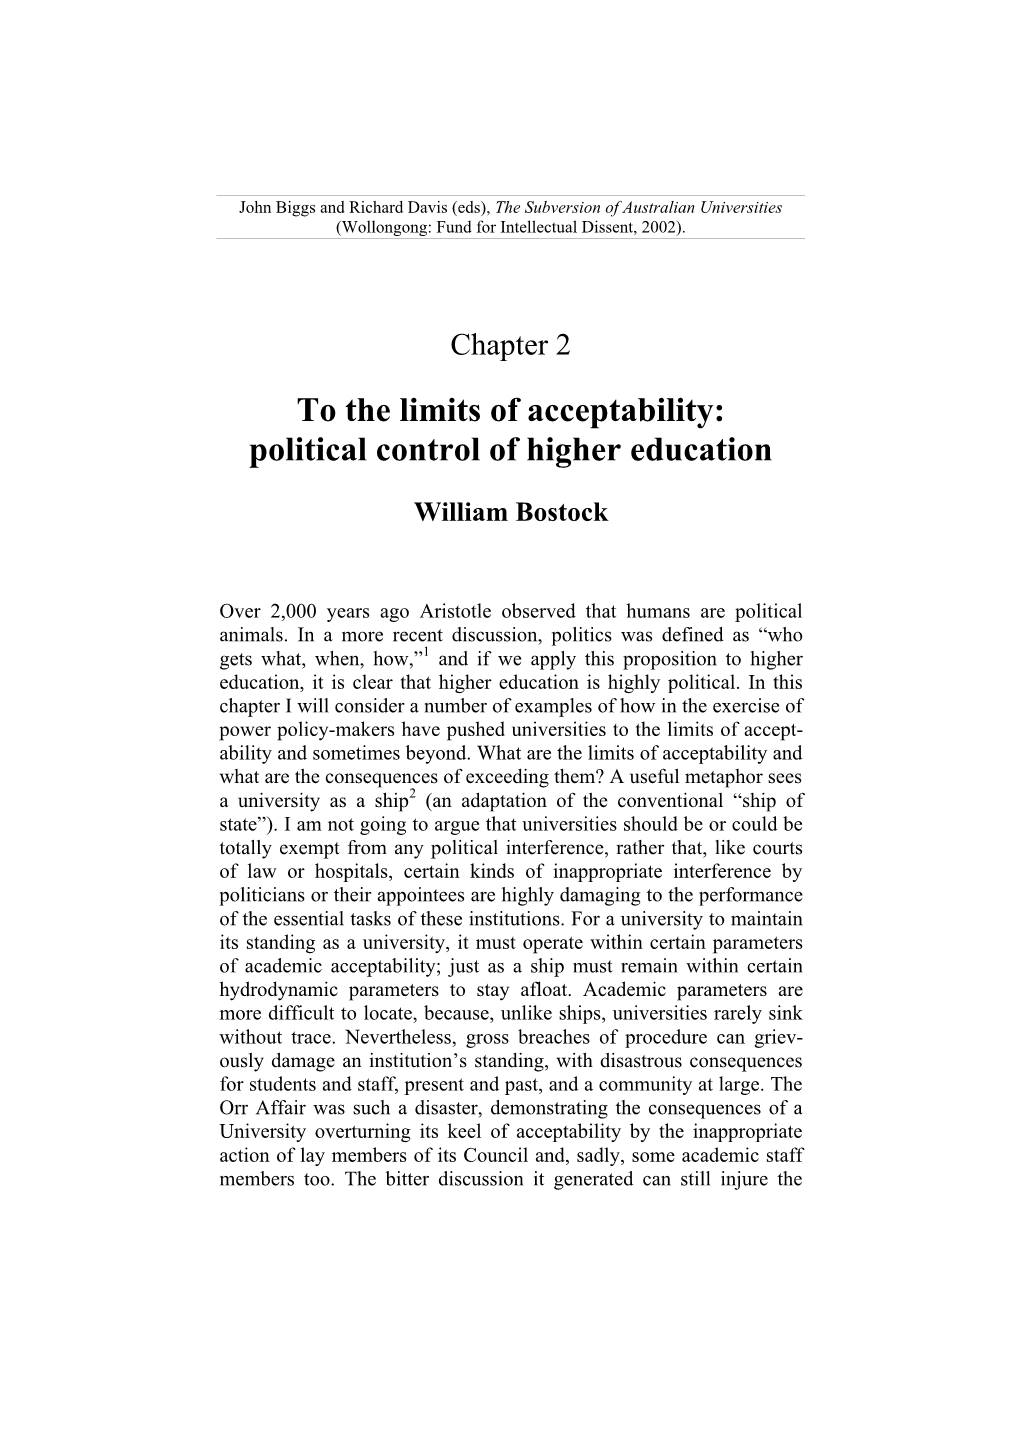 To the Limits of Acceptability: Political Control of Higher Education